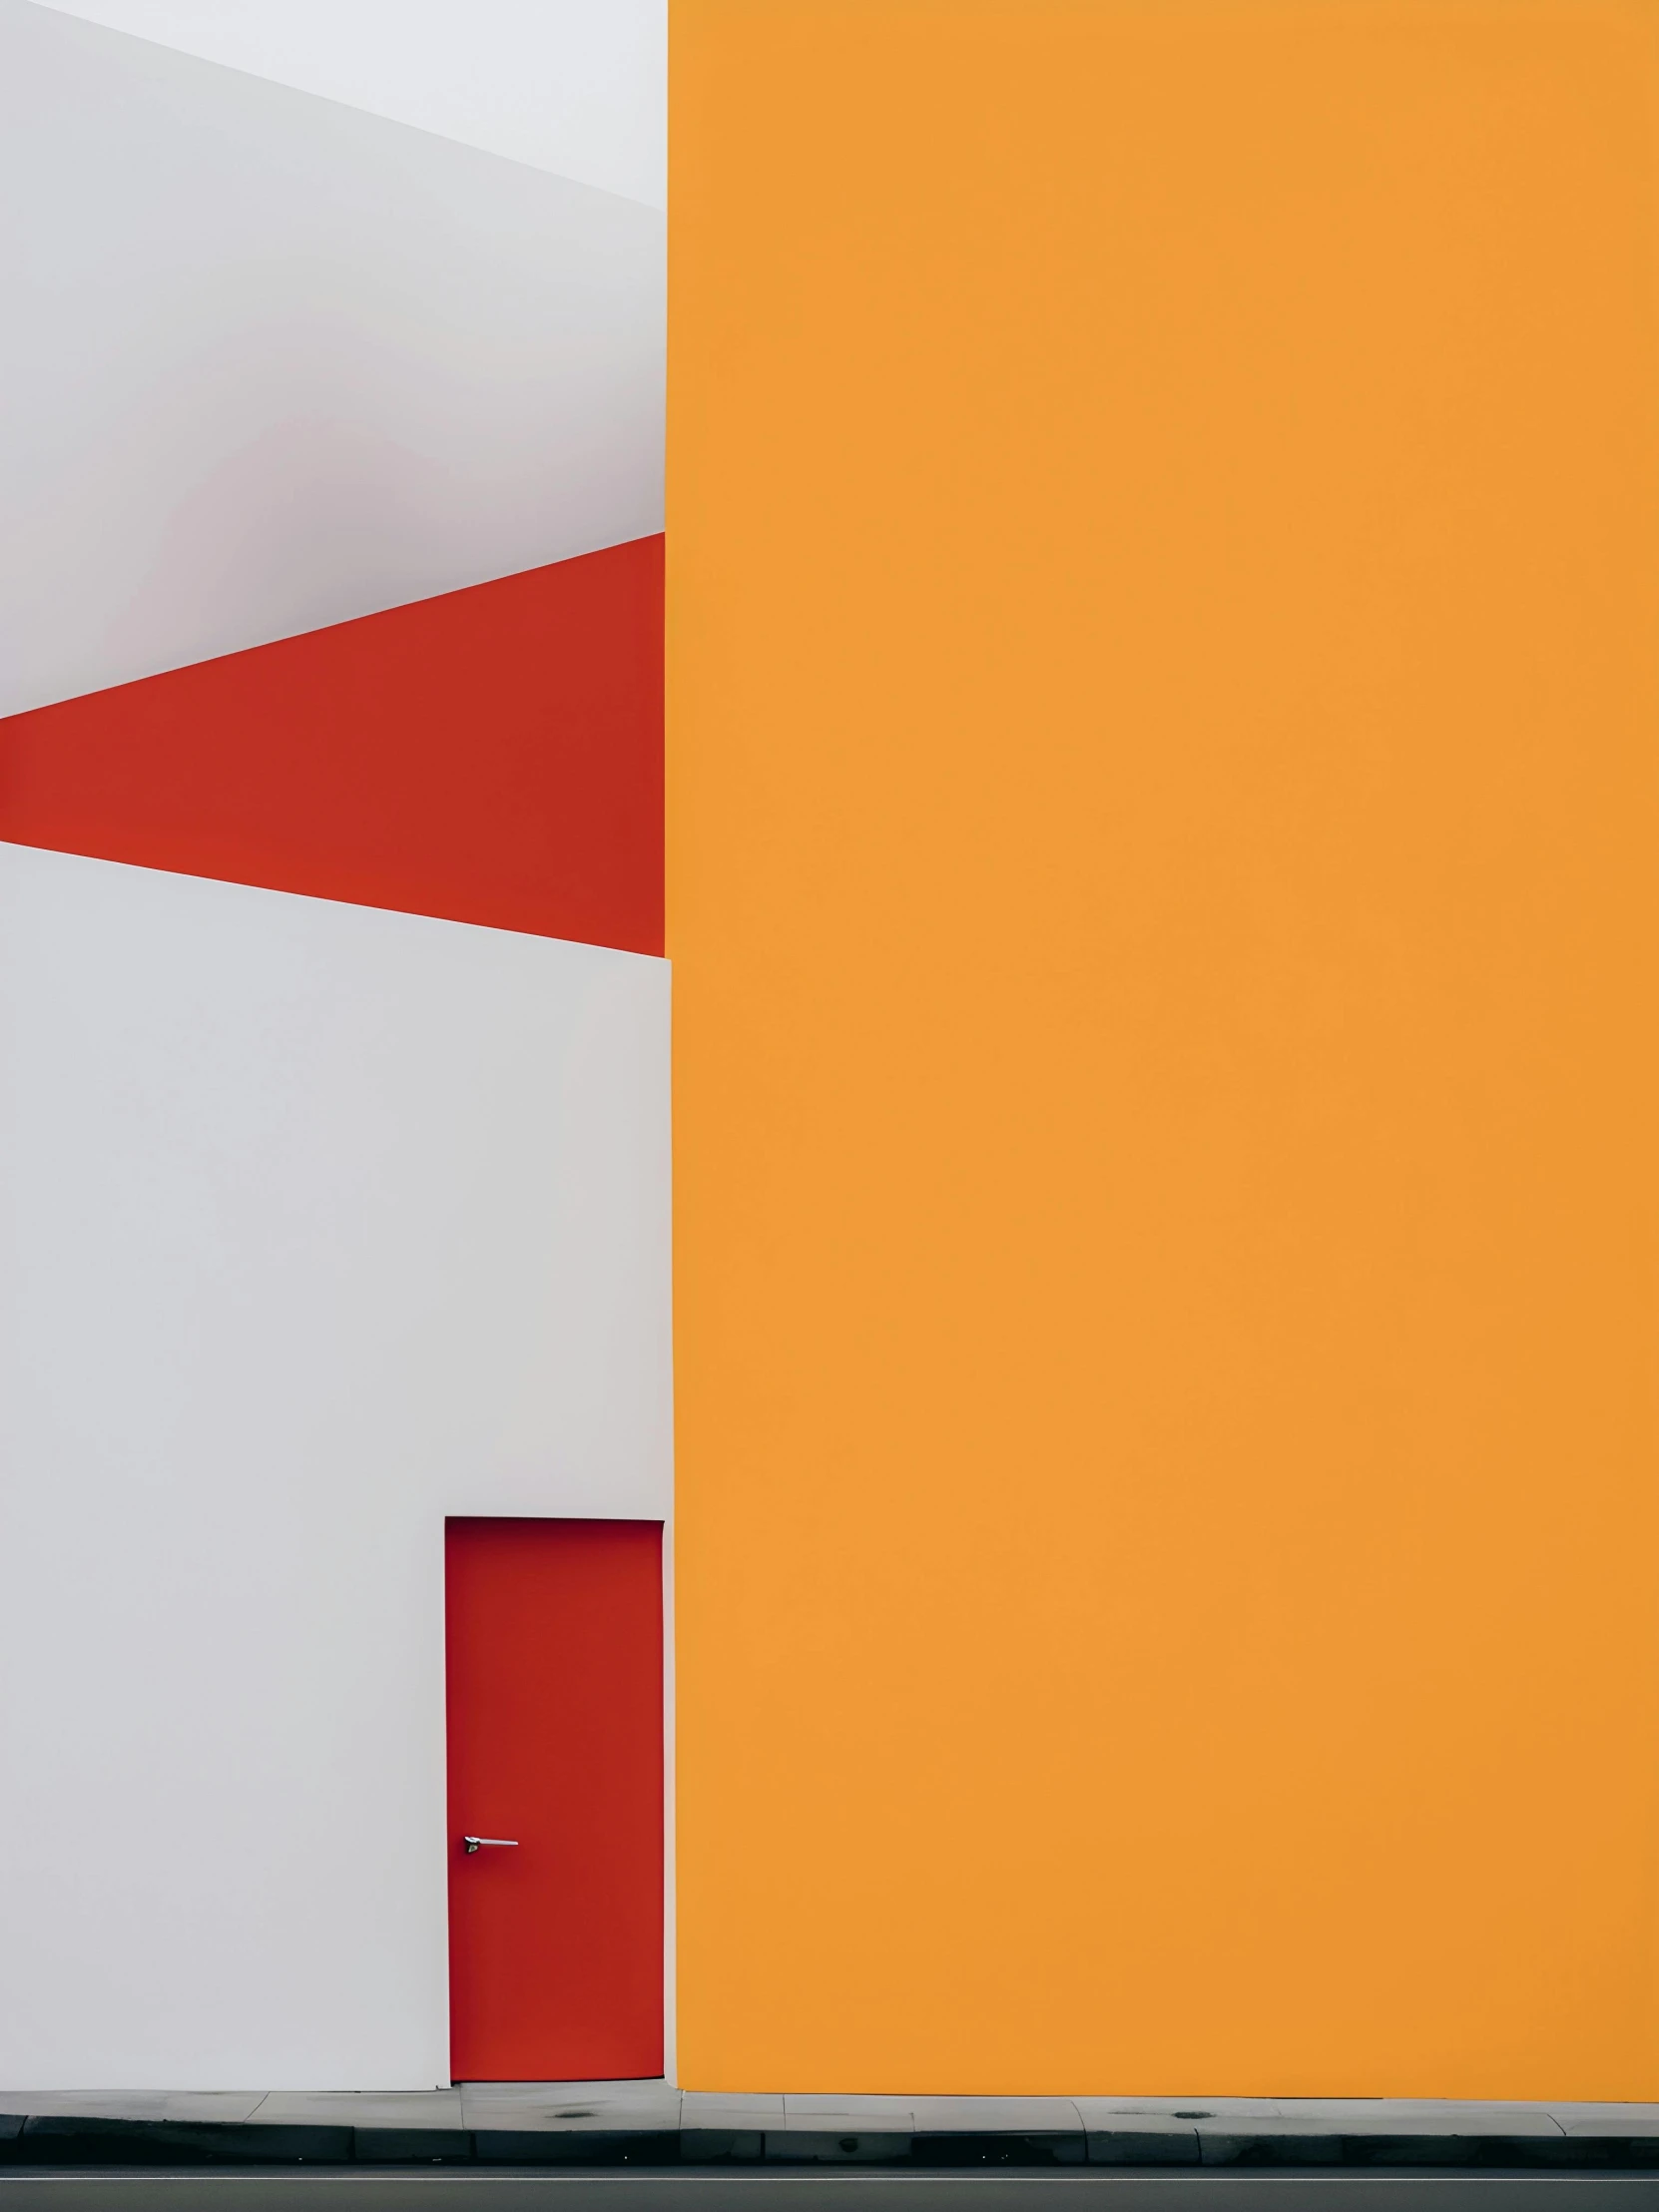 an orange, white and red wall by itself